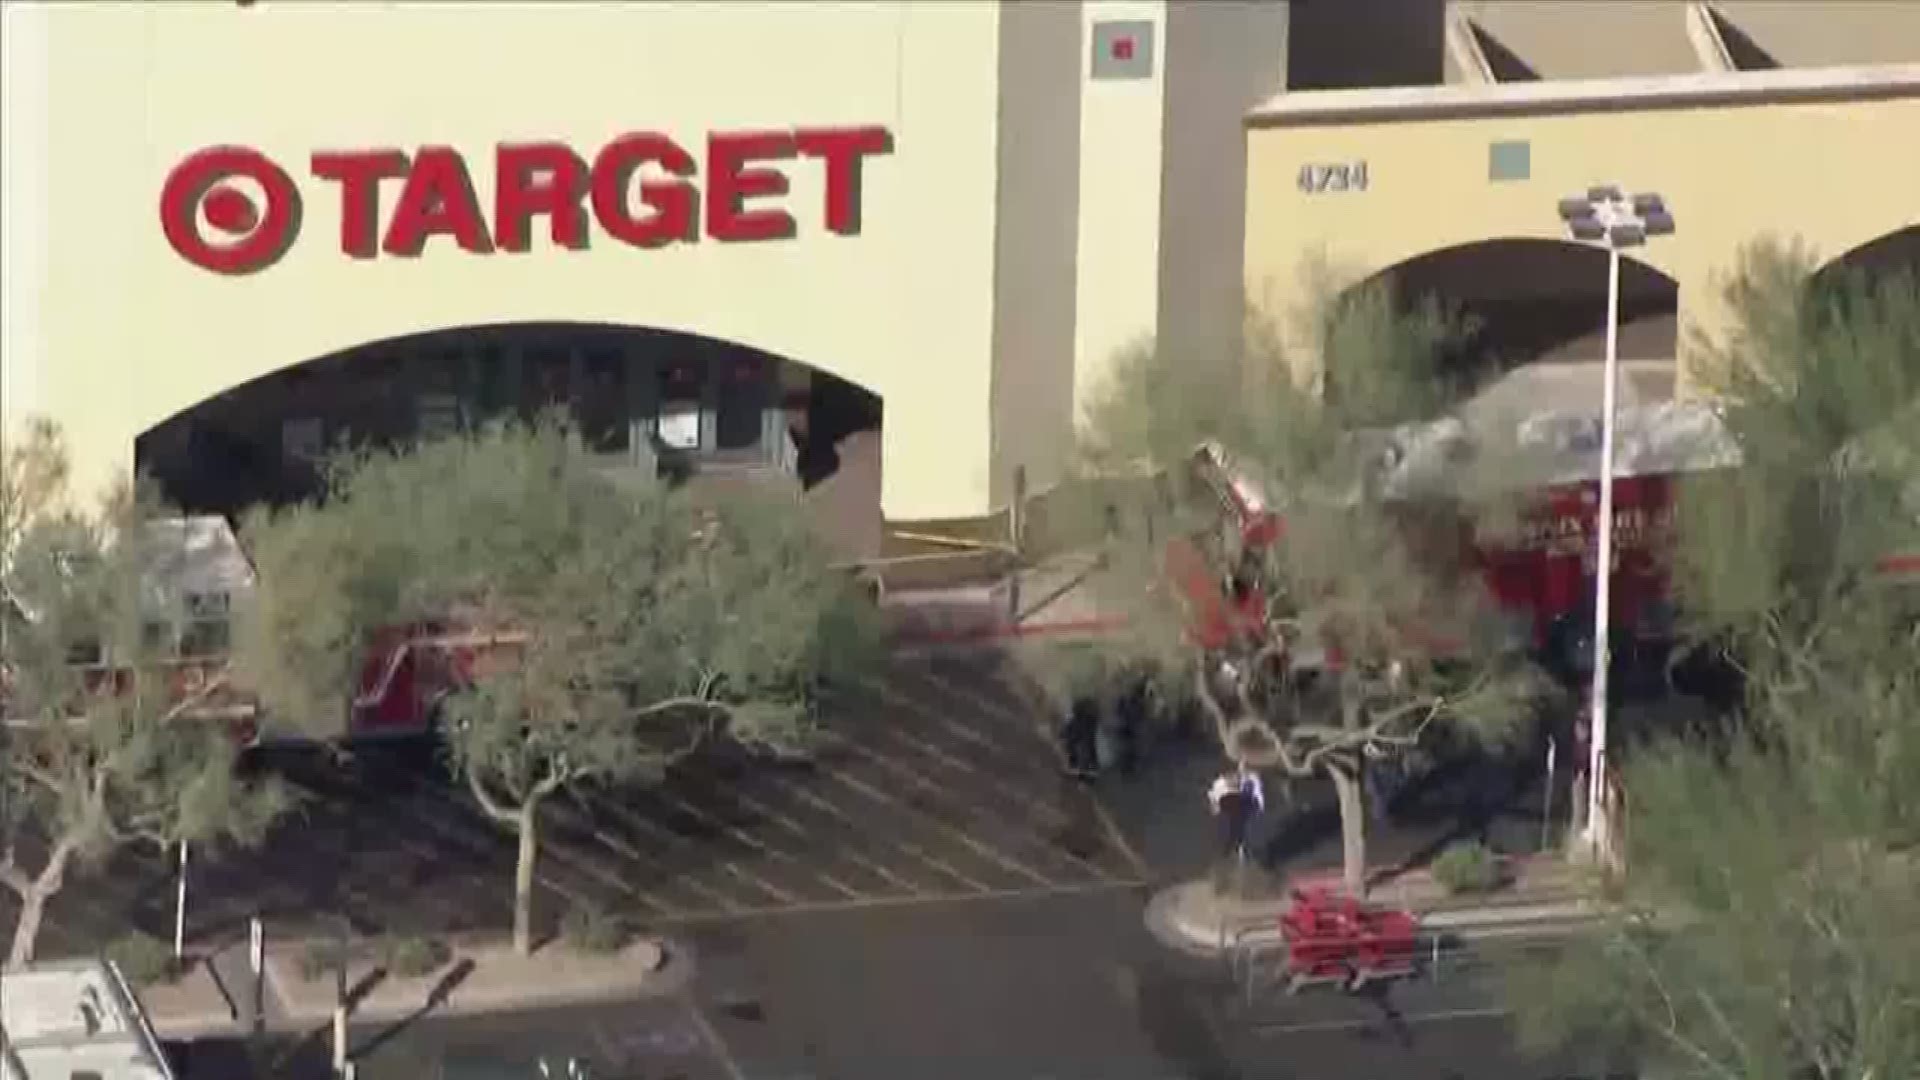 A Target store in Ahwatukee was evacuated this afternoon after a suspect started pouring a vinegar and hydrogen peroxide mixture over food products in the store. It is believed that the suspect may have tampered with other food products as well.